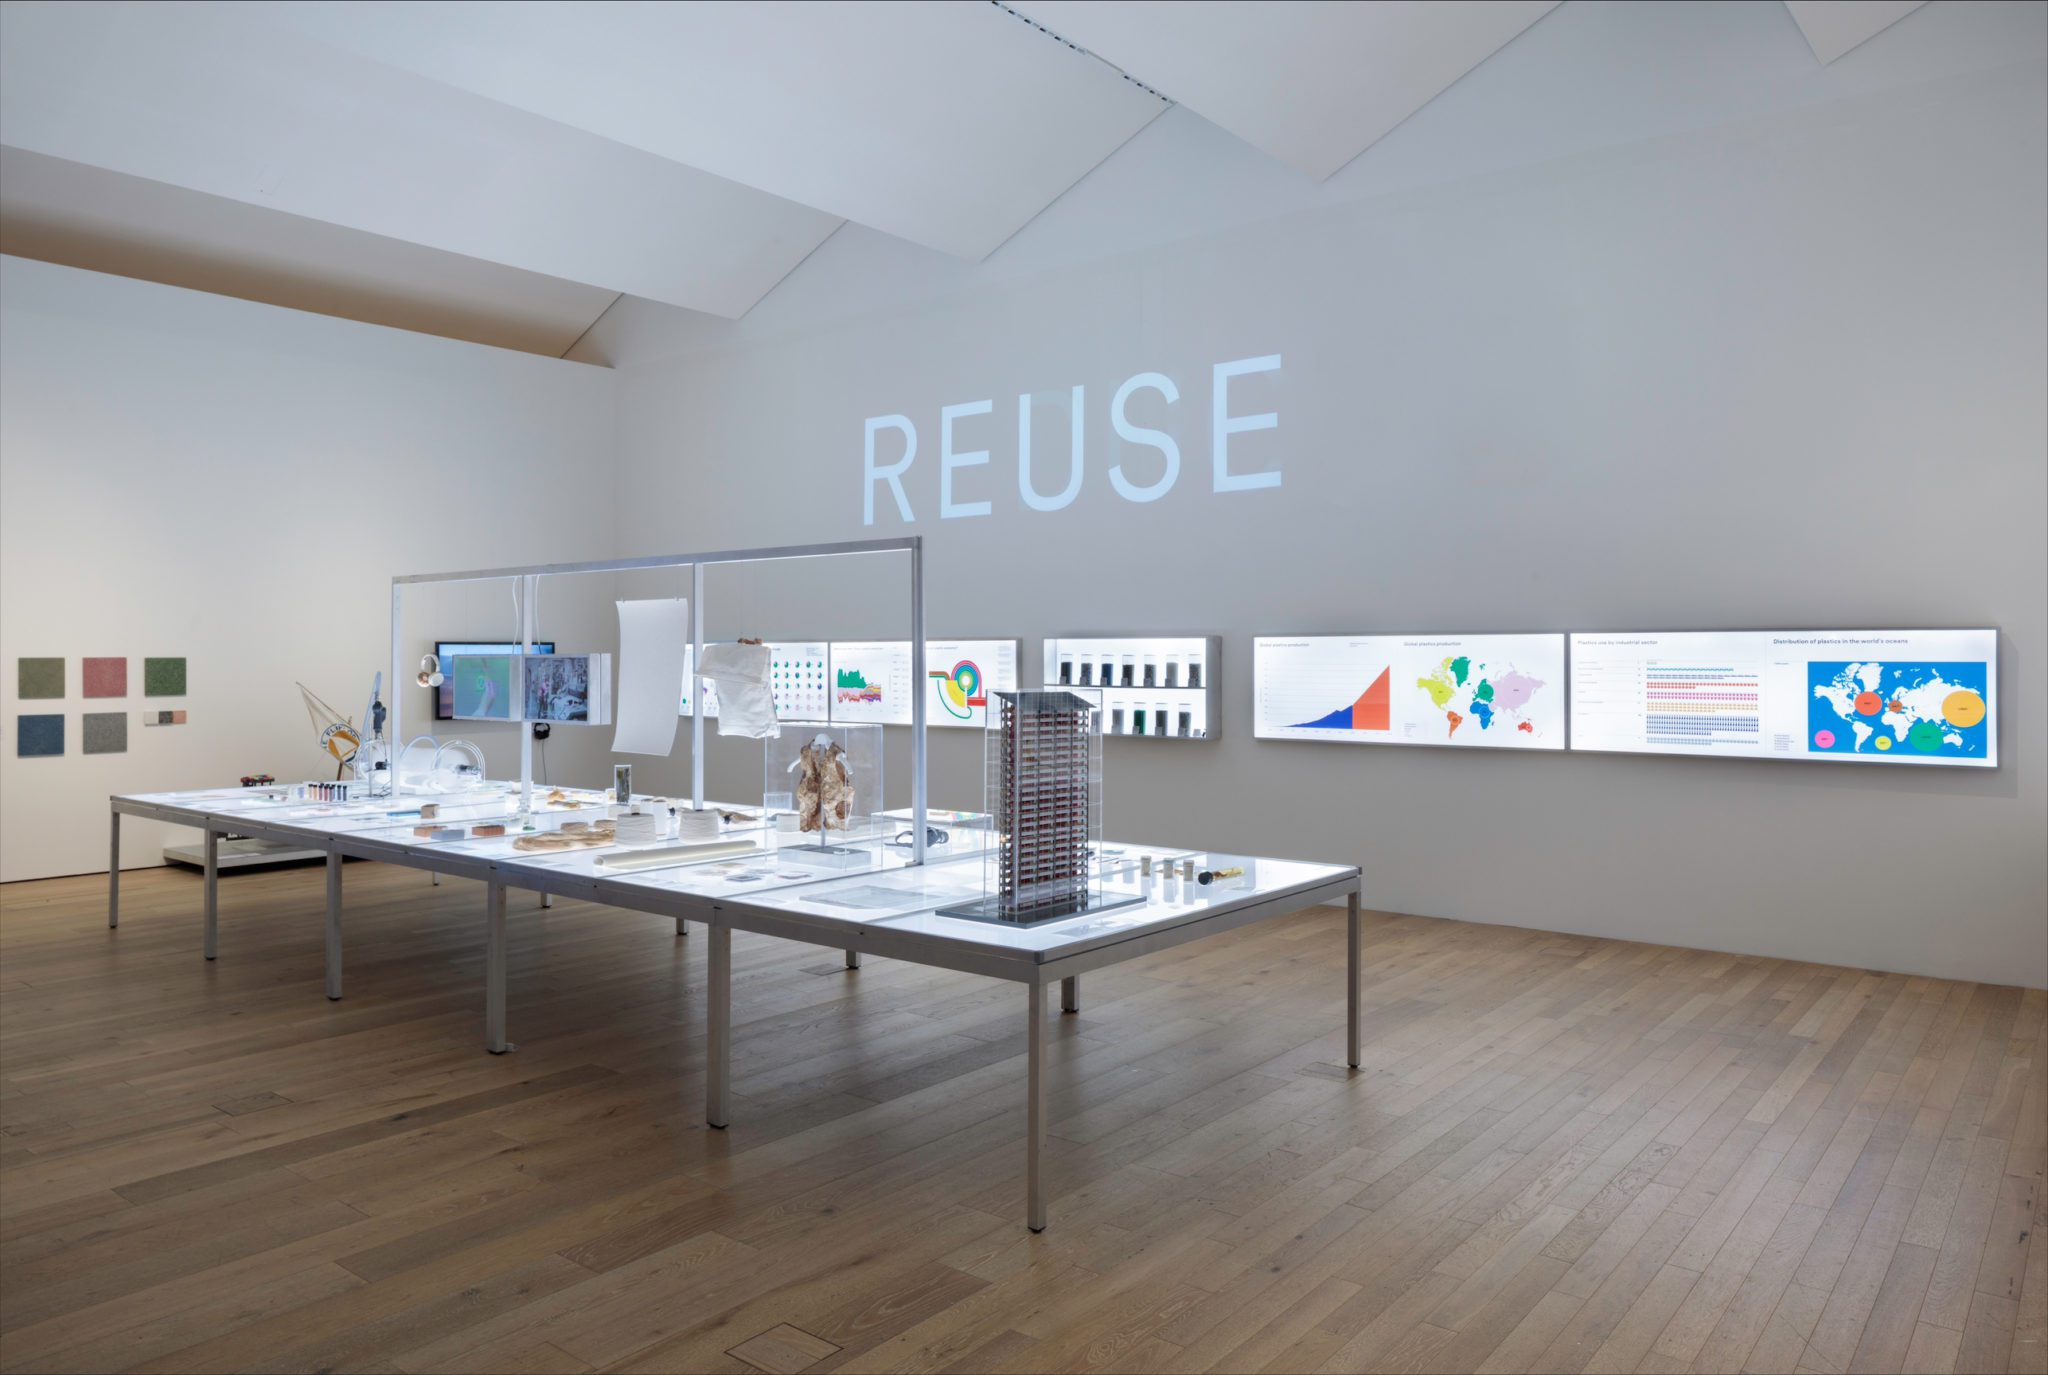 Better Shelter at the V&A Dundee – Plastic: Remaking our world